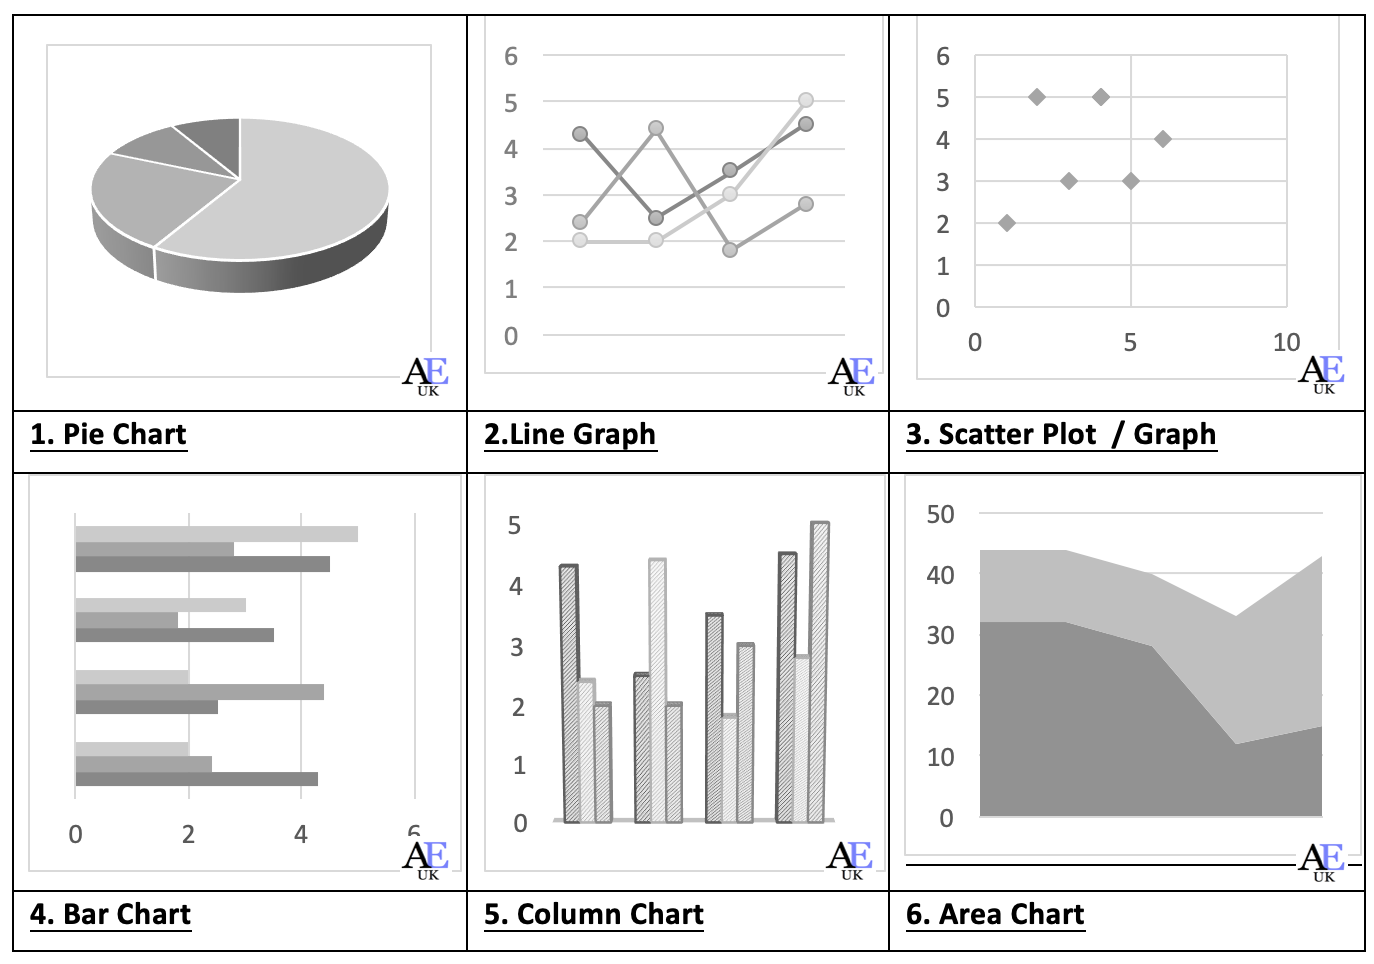 Types Of Graph Charts